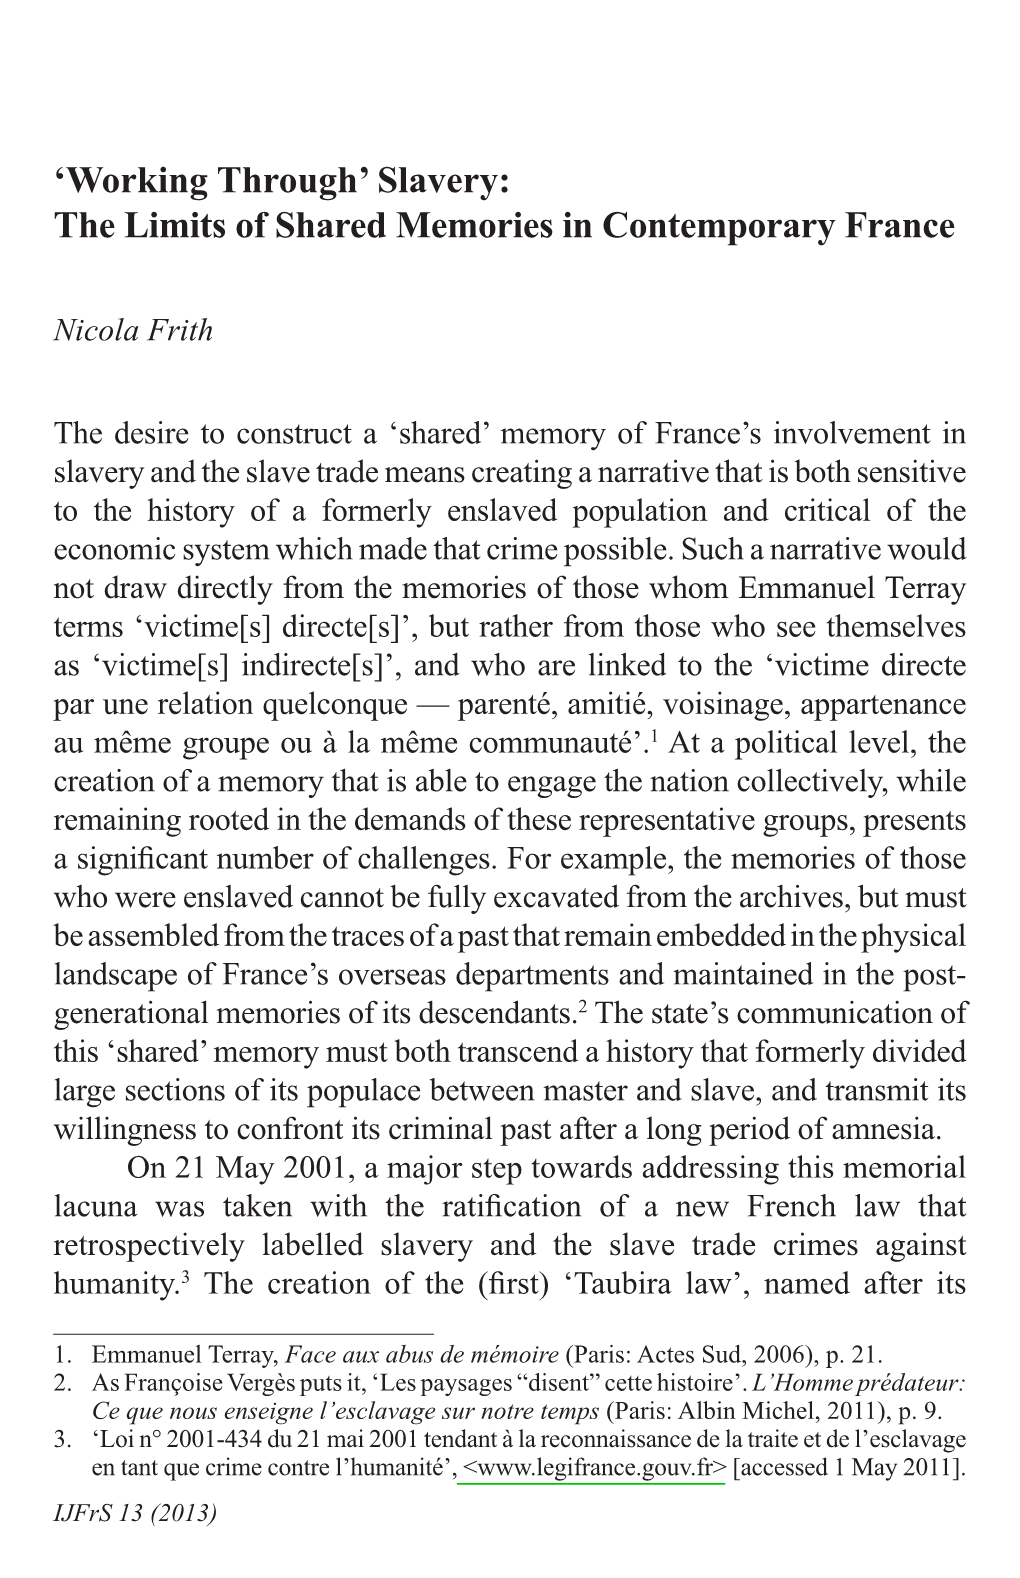 Slavery: the Limits of Shared Memories in Contemporary France